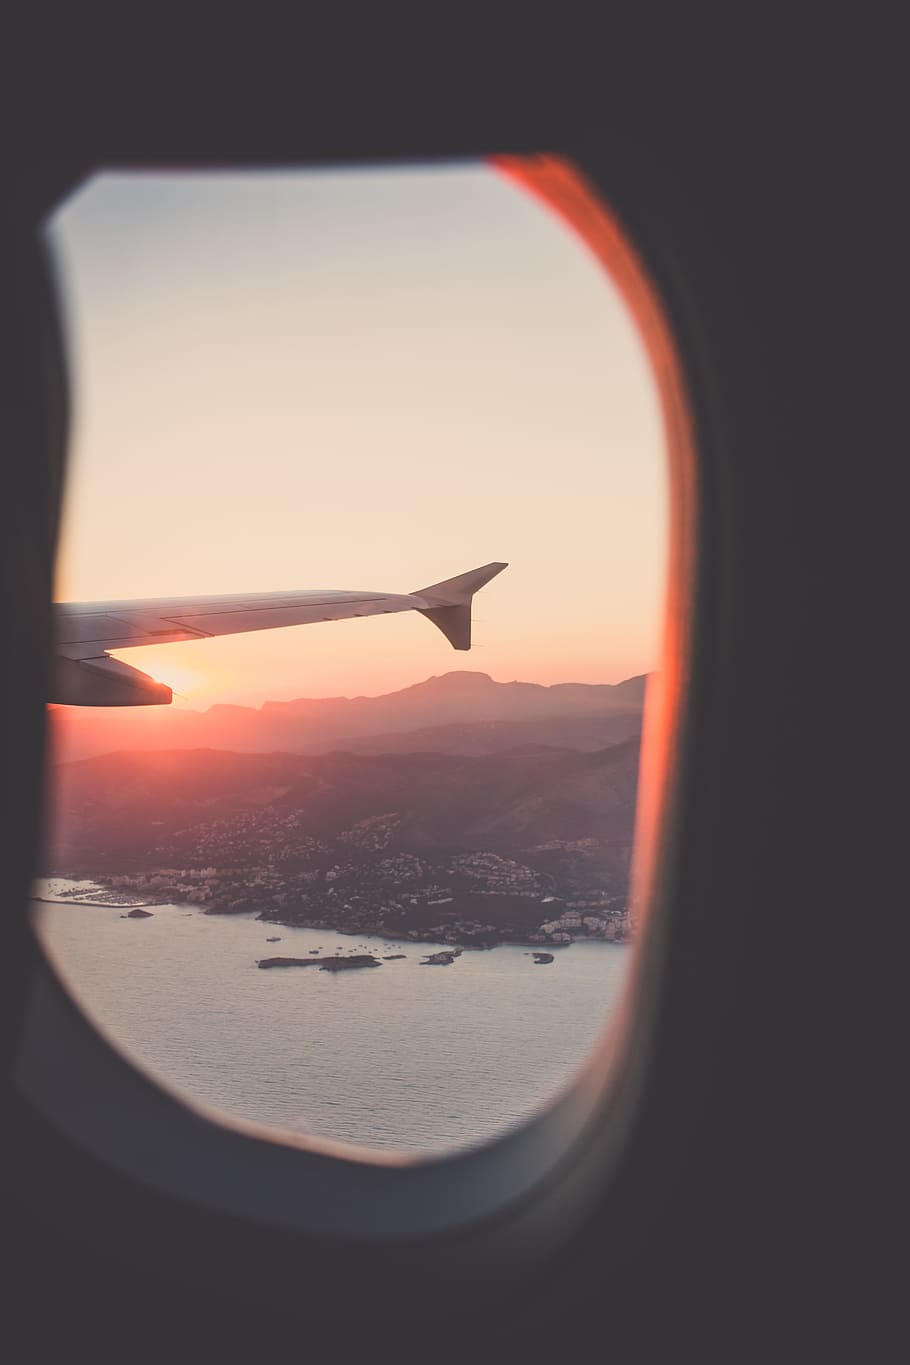 person riding airplane photography, airplane wing through window overlooking island with body of water photography, HD wallpaper